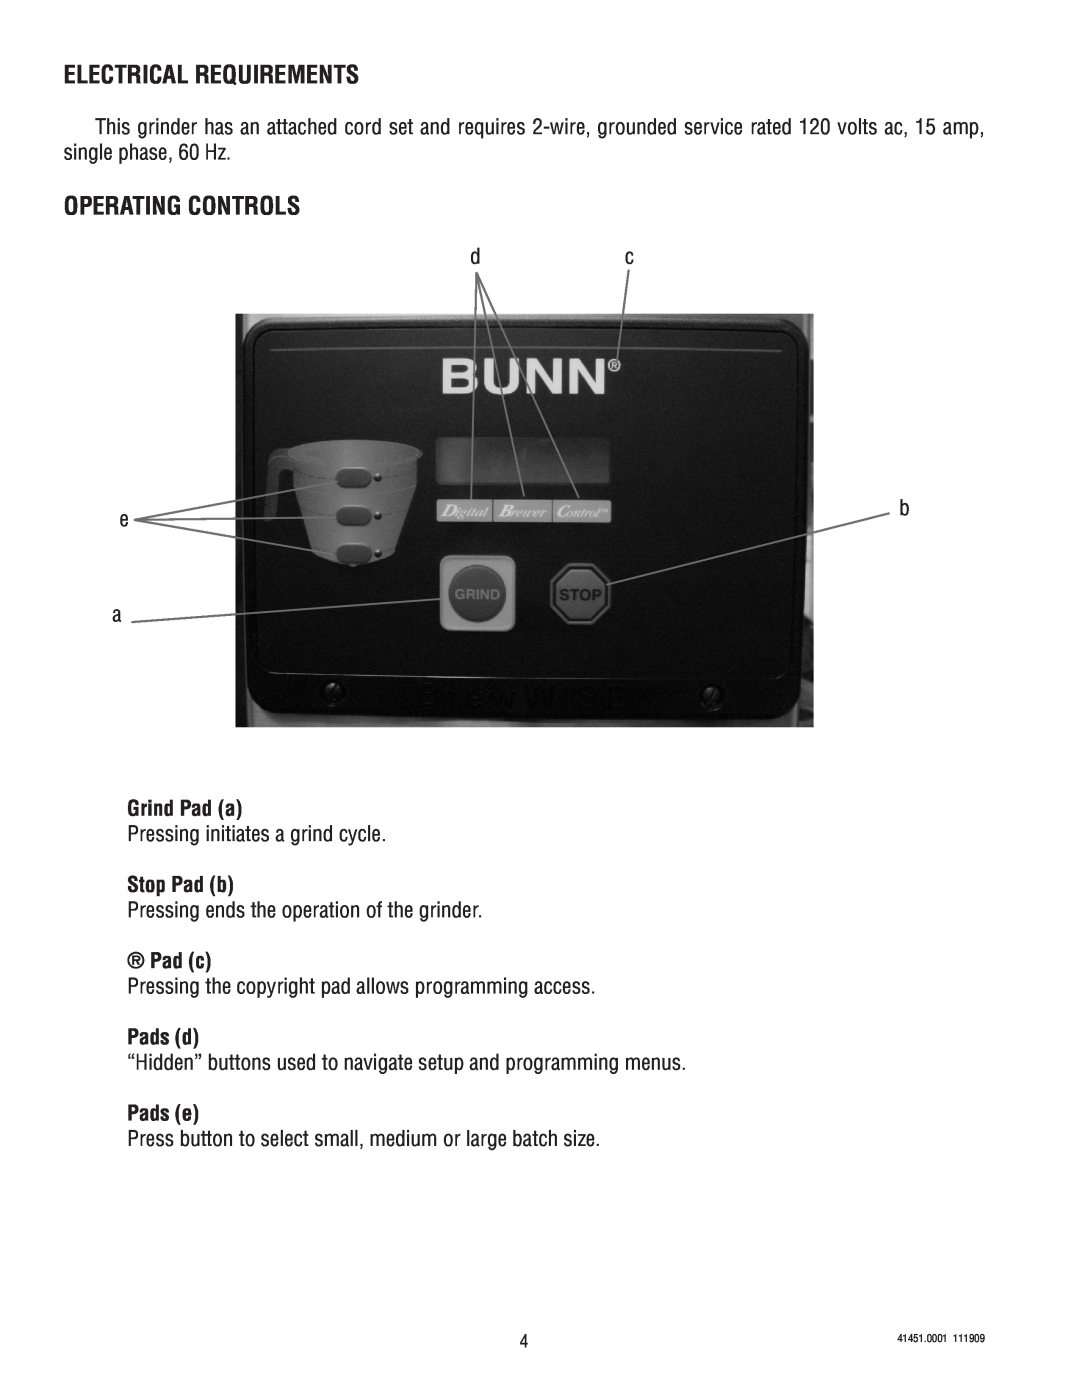 Bunn G9WD-RH service manual Electrical Requirements, Operating Controls, Grind Pad a, Stop Pad b, Pad c, Pads d, Pads e 